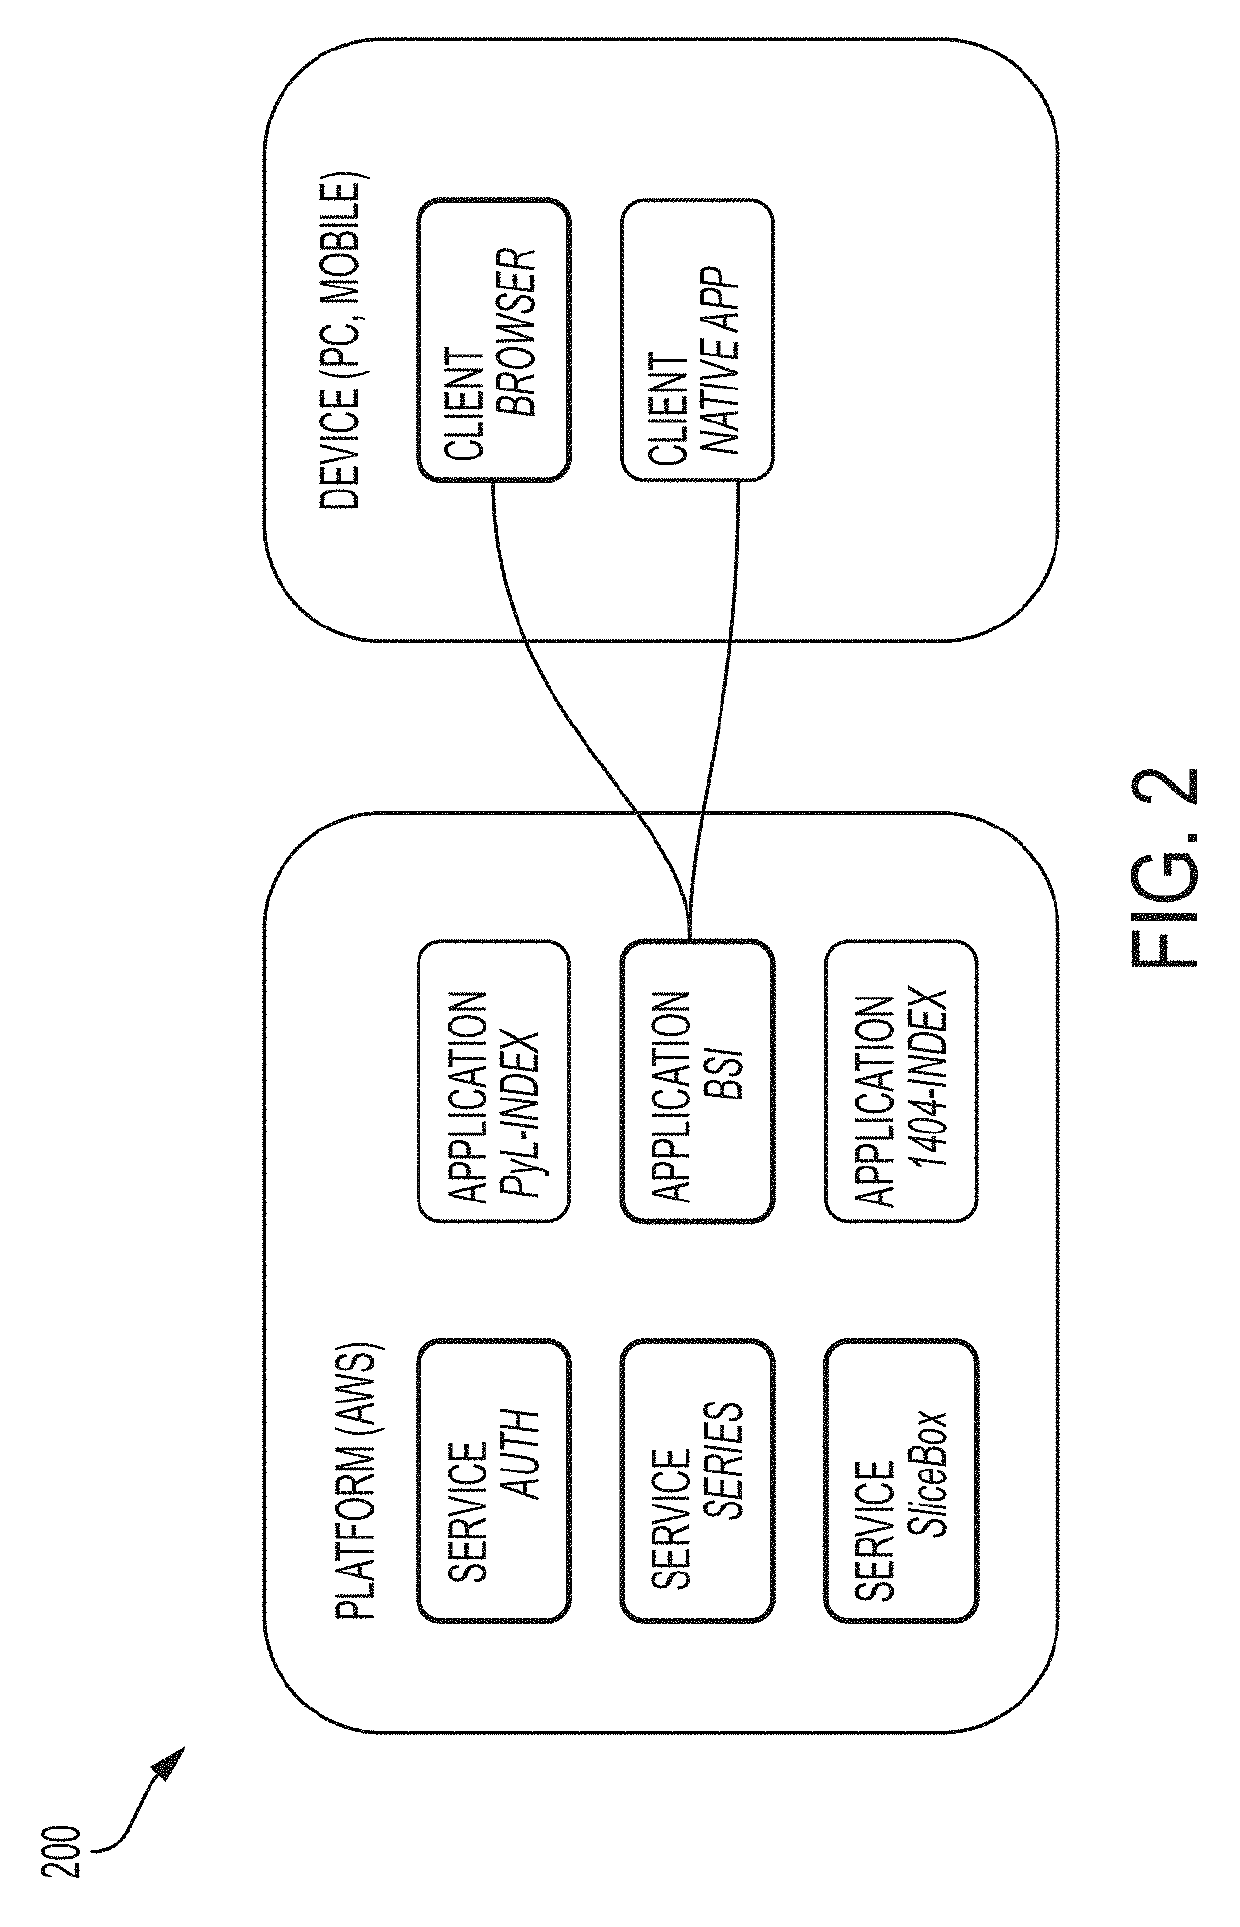 Network for medical image analysis, decision support system, and related graphical user interface (GUI) applications